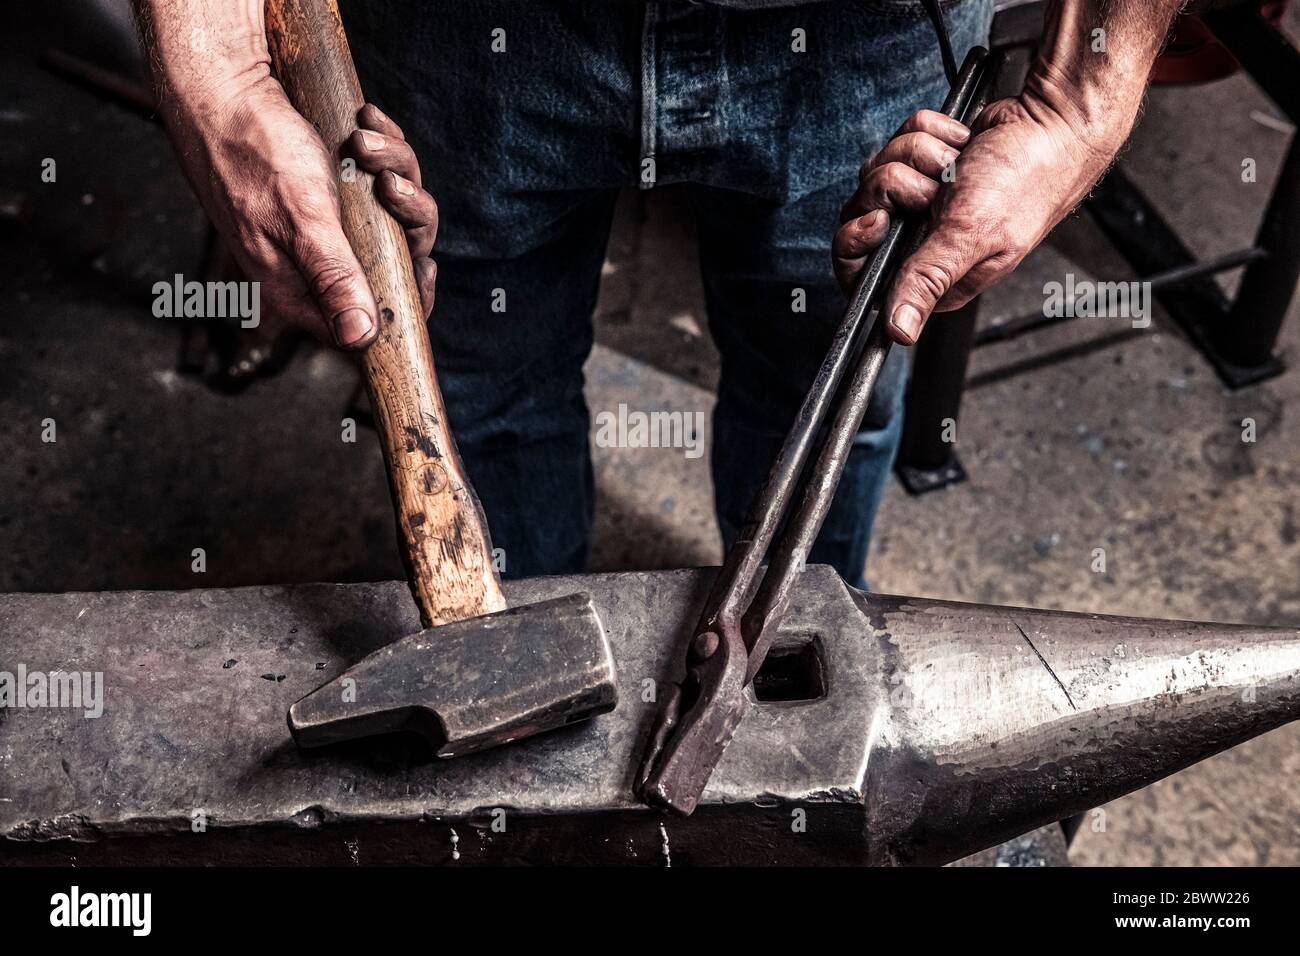 Knife maker holding pliers and hammer on anvil Stock Photo